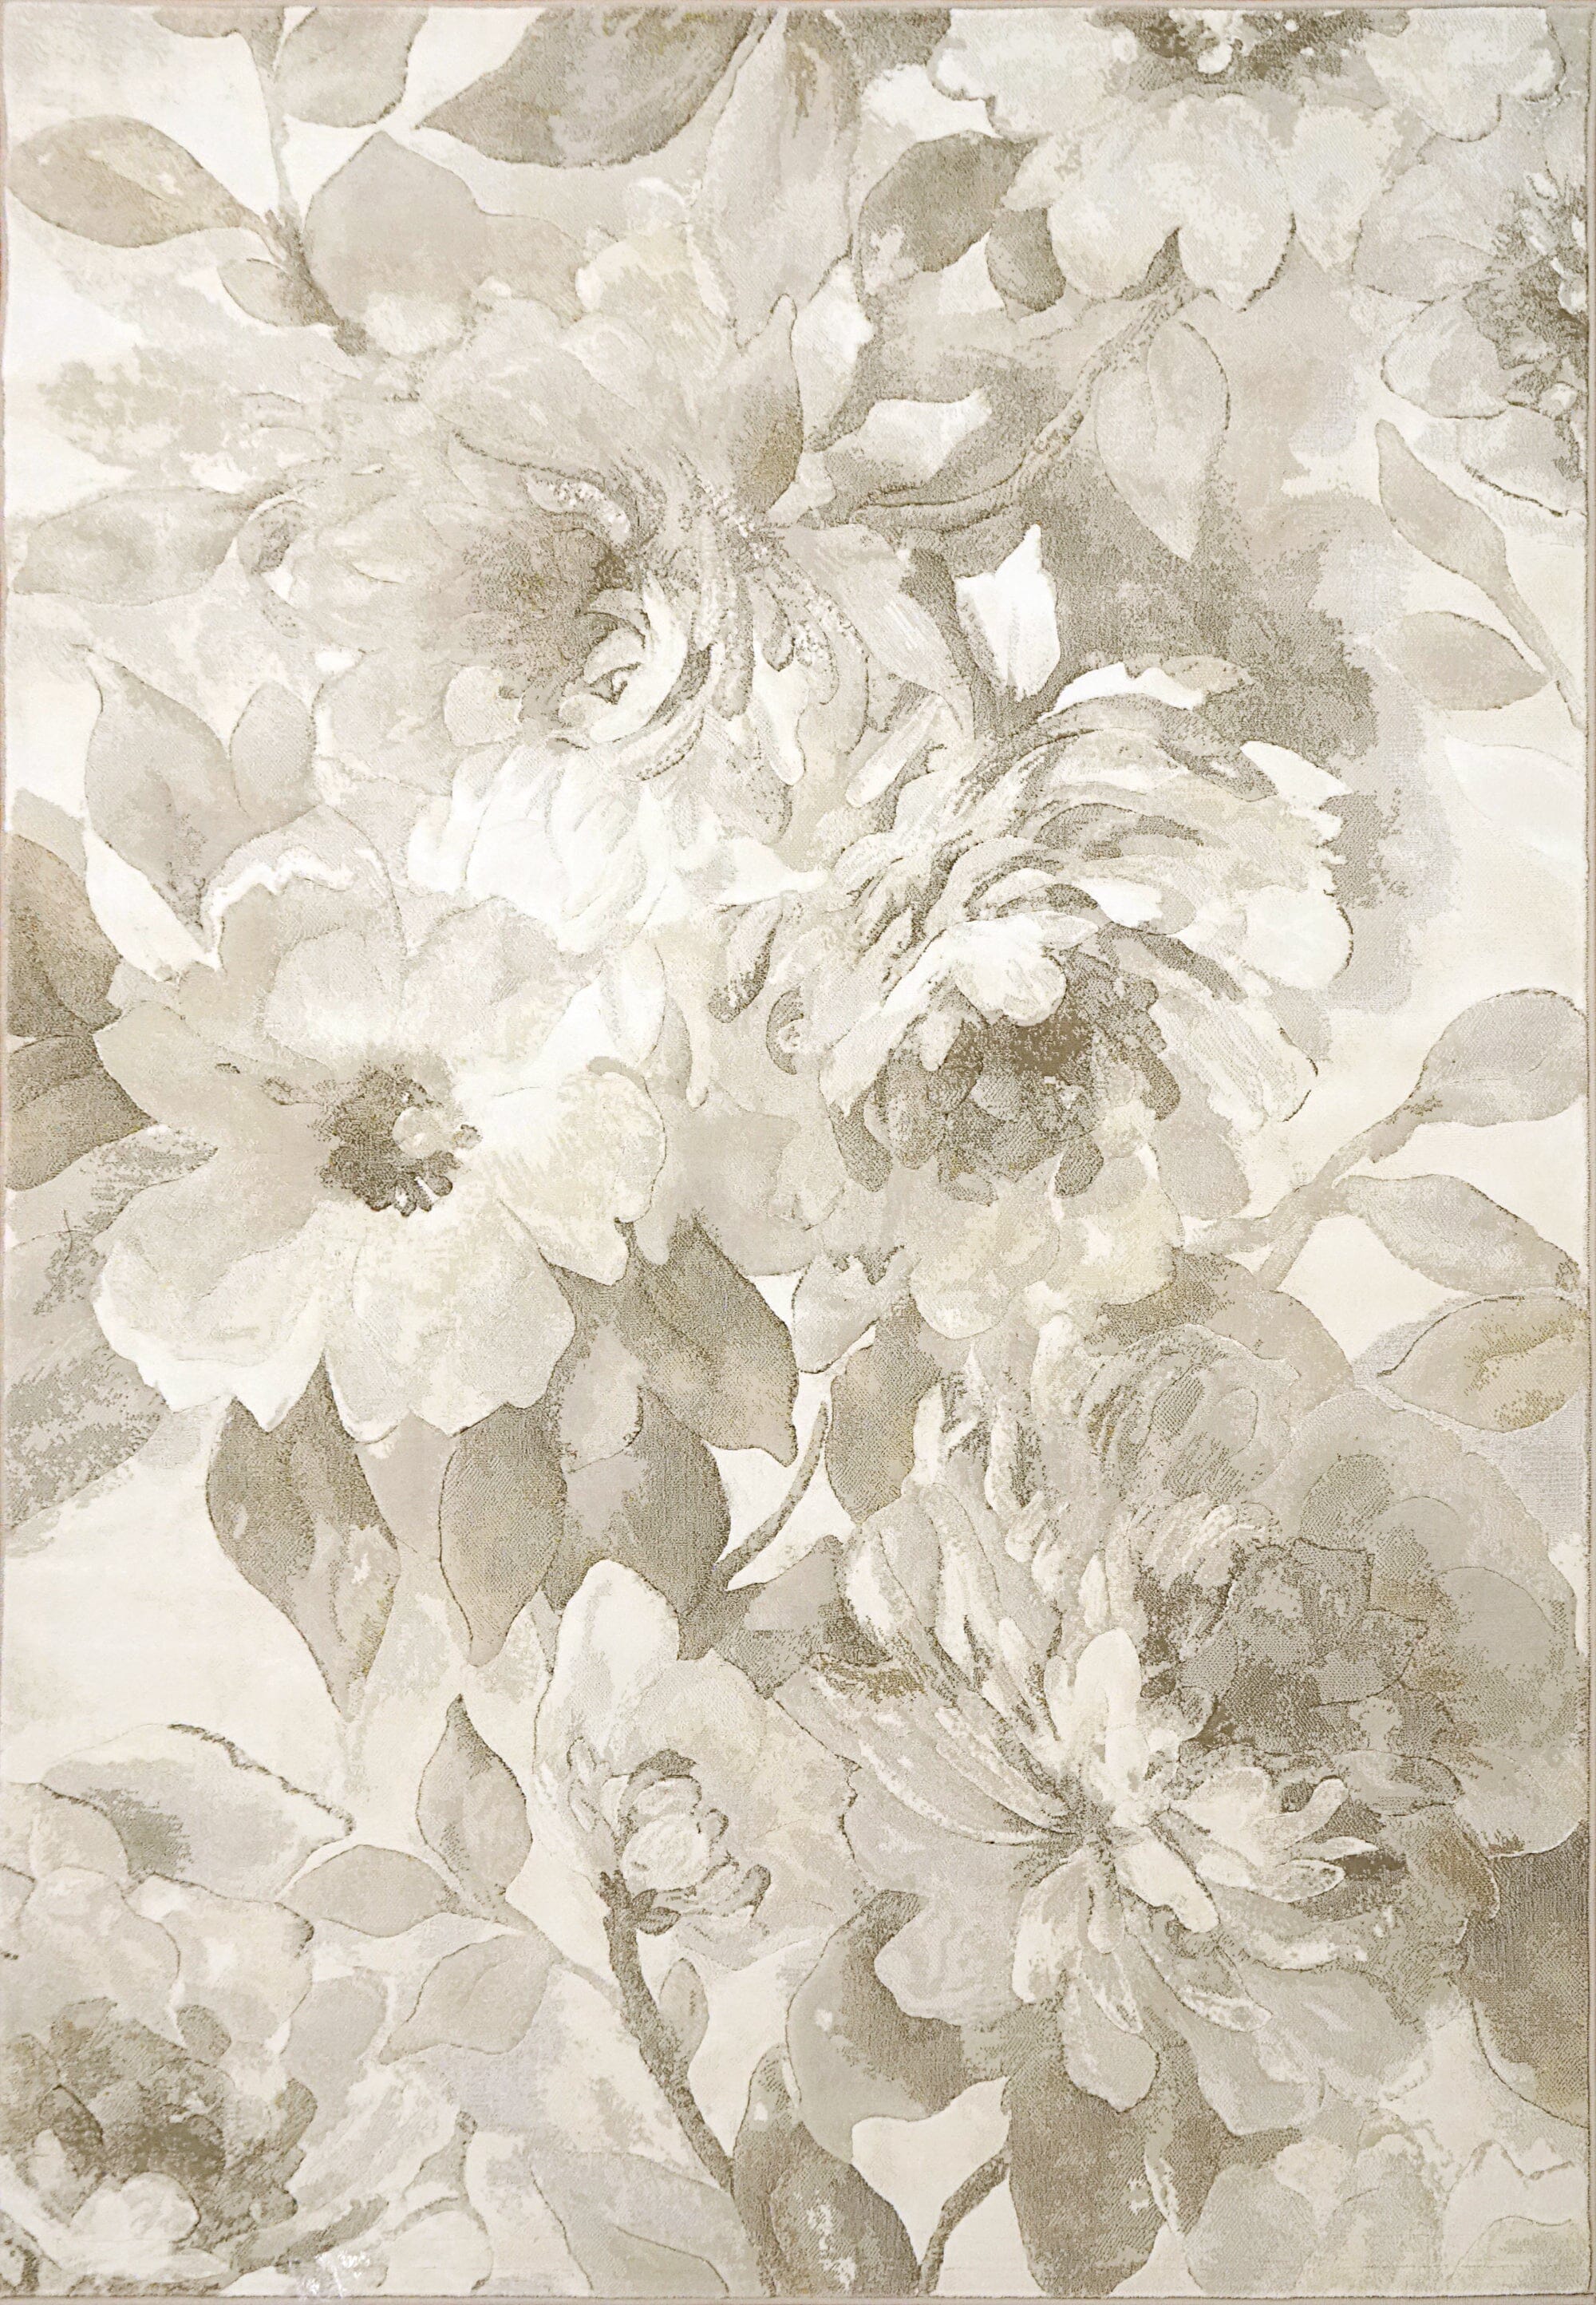 Anne Klein Beige/Cream The Illusions Contemporary Floral Rug Collection